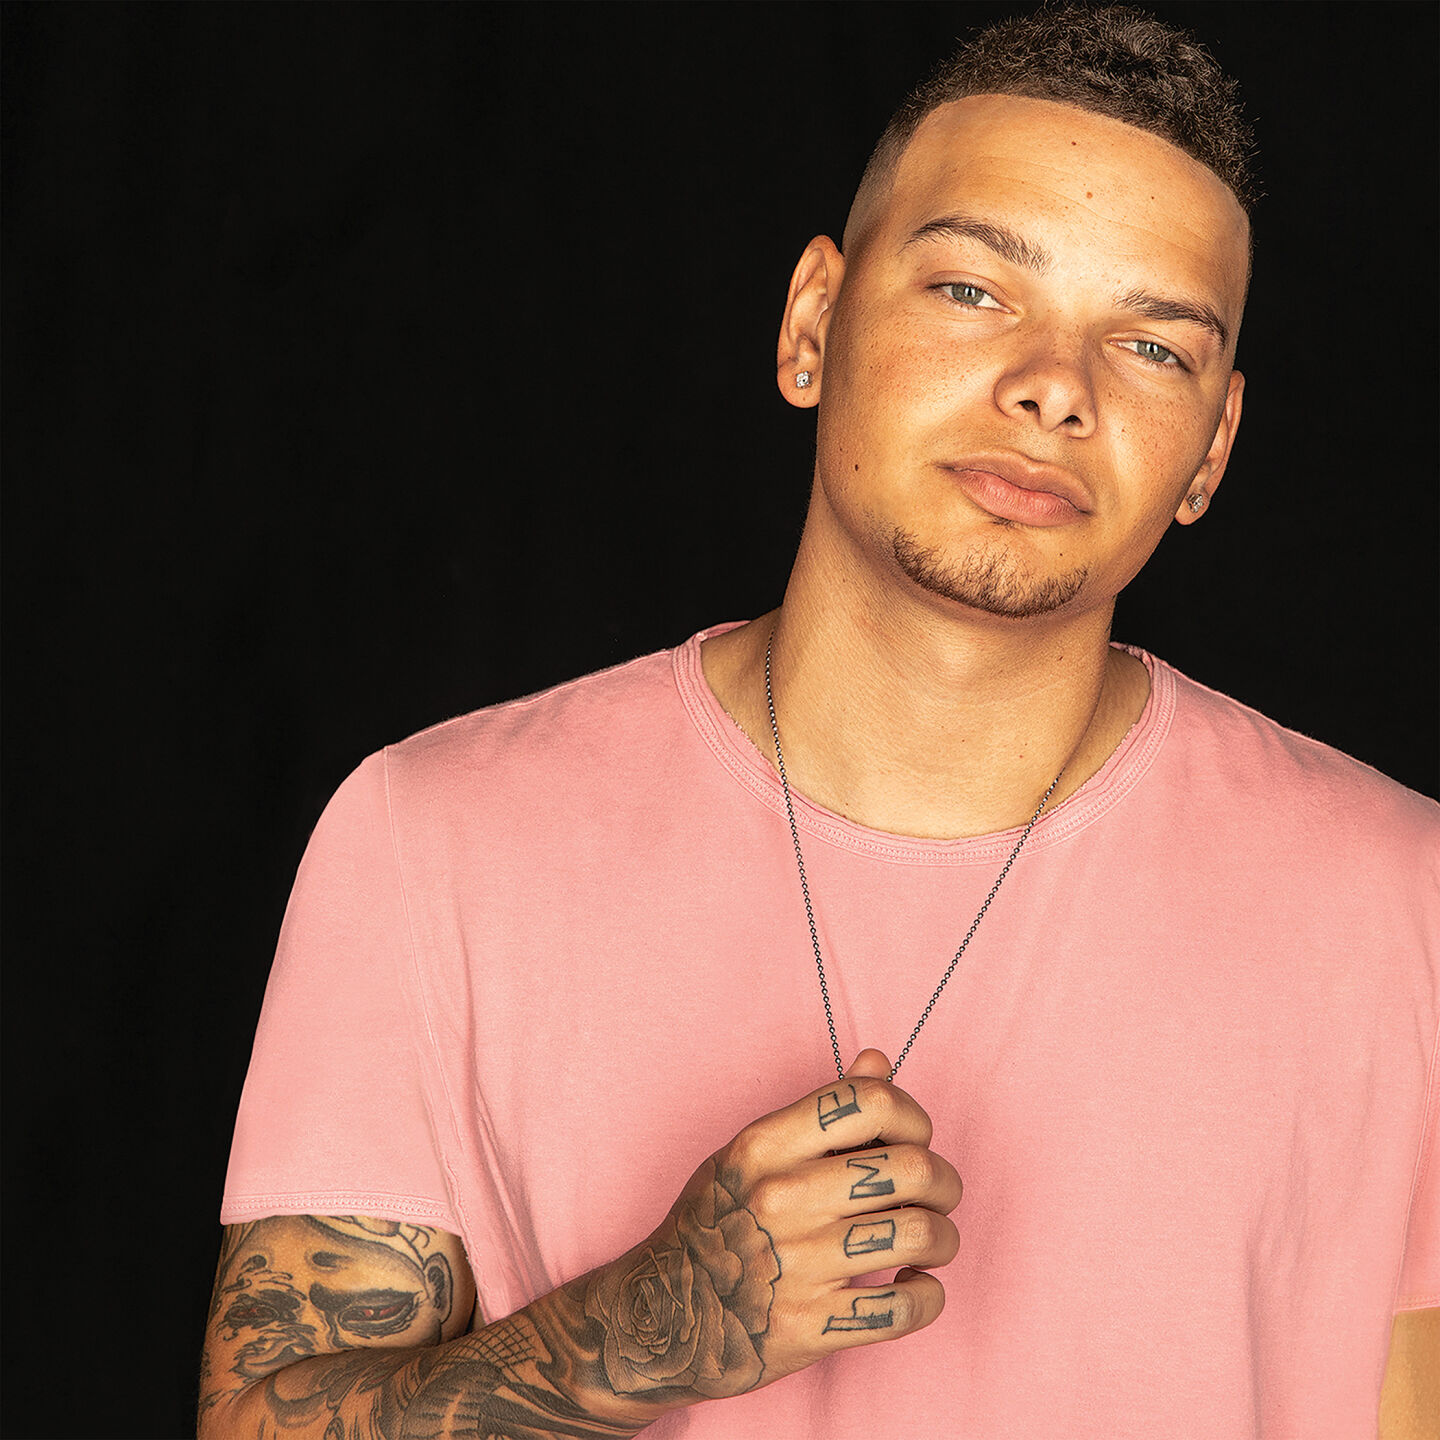 Interview with Kane Brown on Country Ink